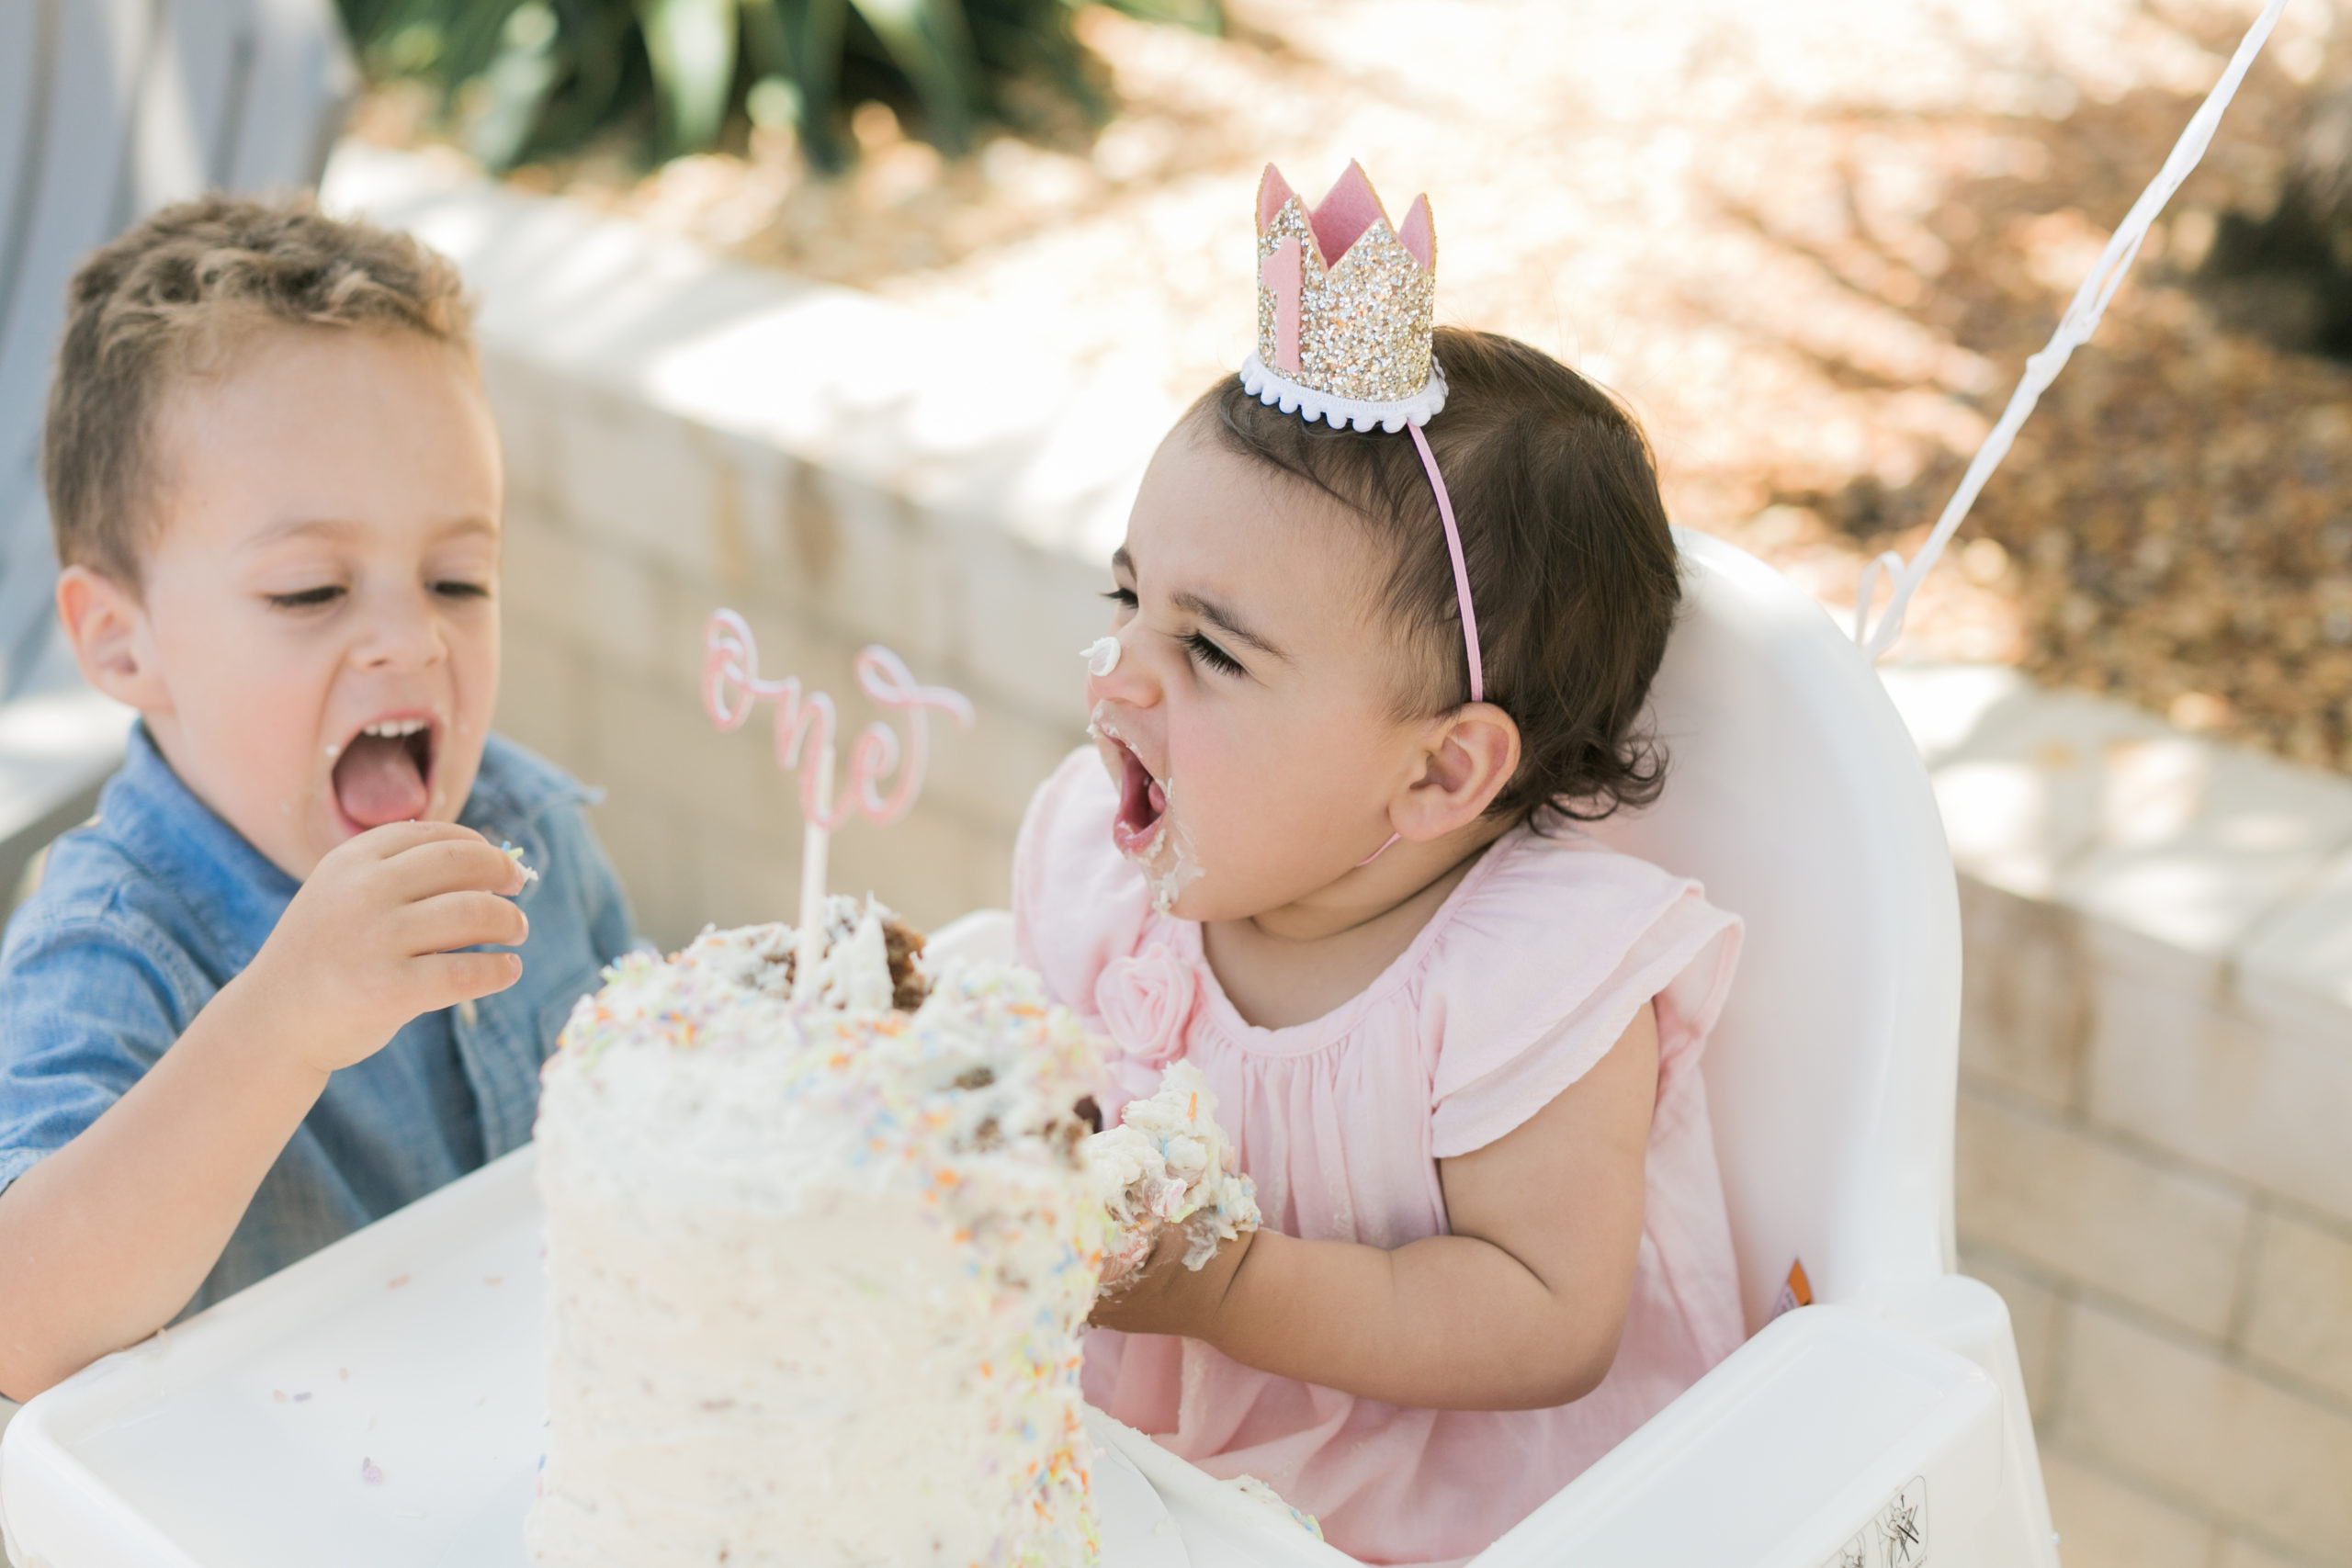 A letter to my daughter on her first birthday